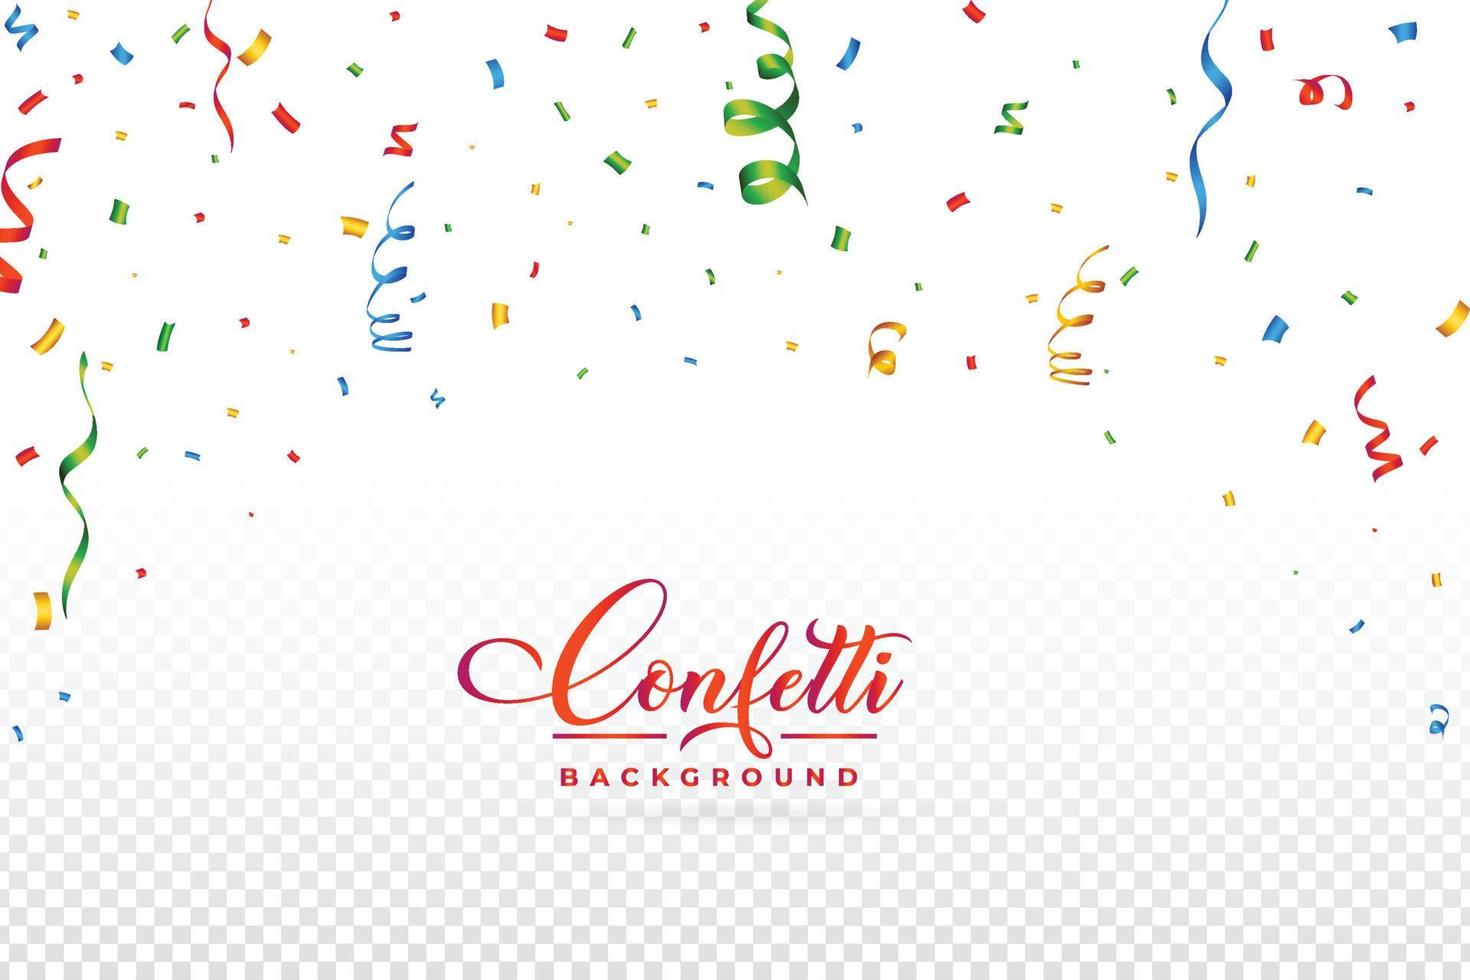 Confetti vector elements for festival background. Confetti falling illustration on a transparent background. Colorful confetti and party tinsel vector. Event and party celebration element.